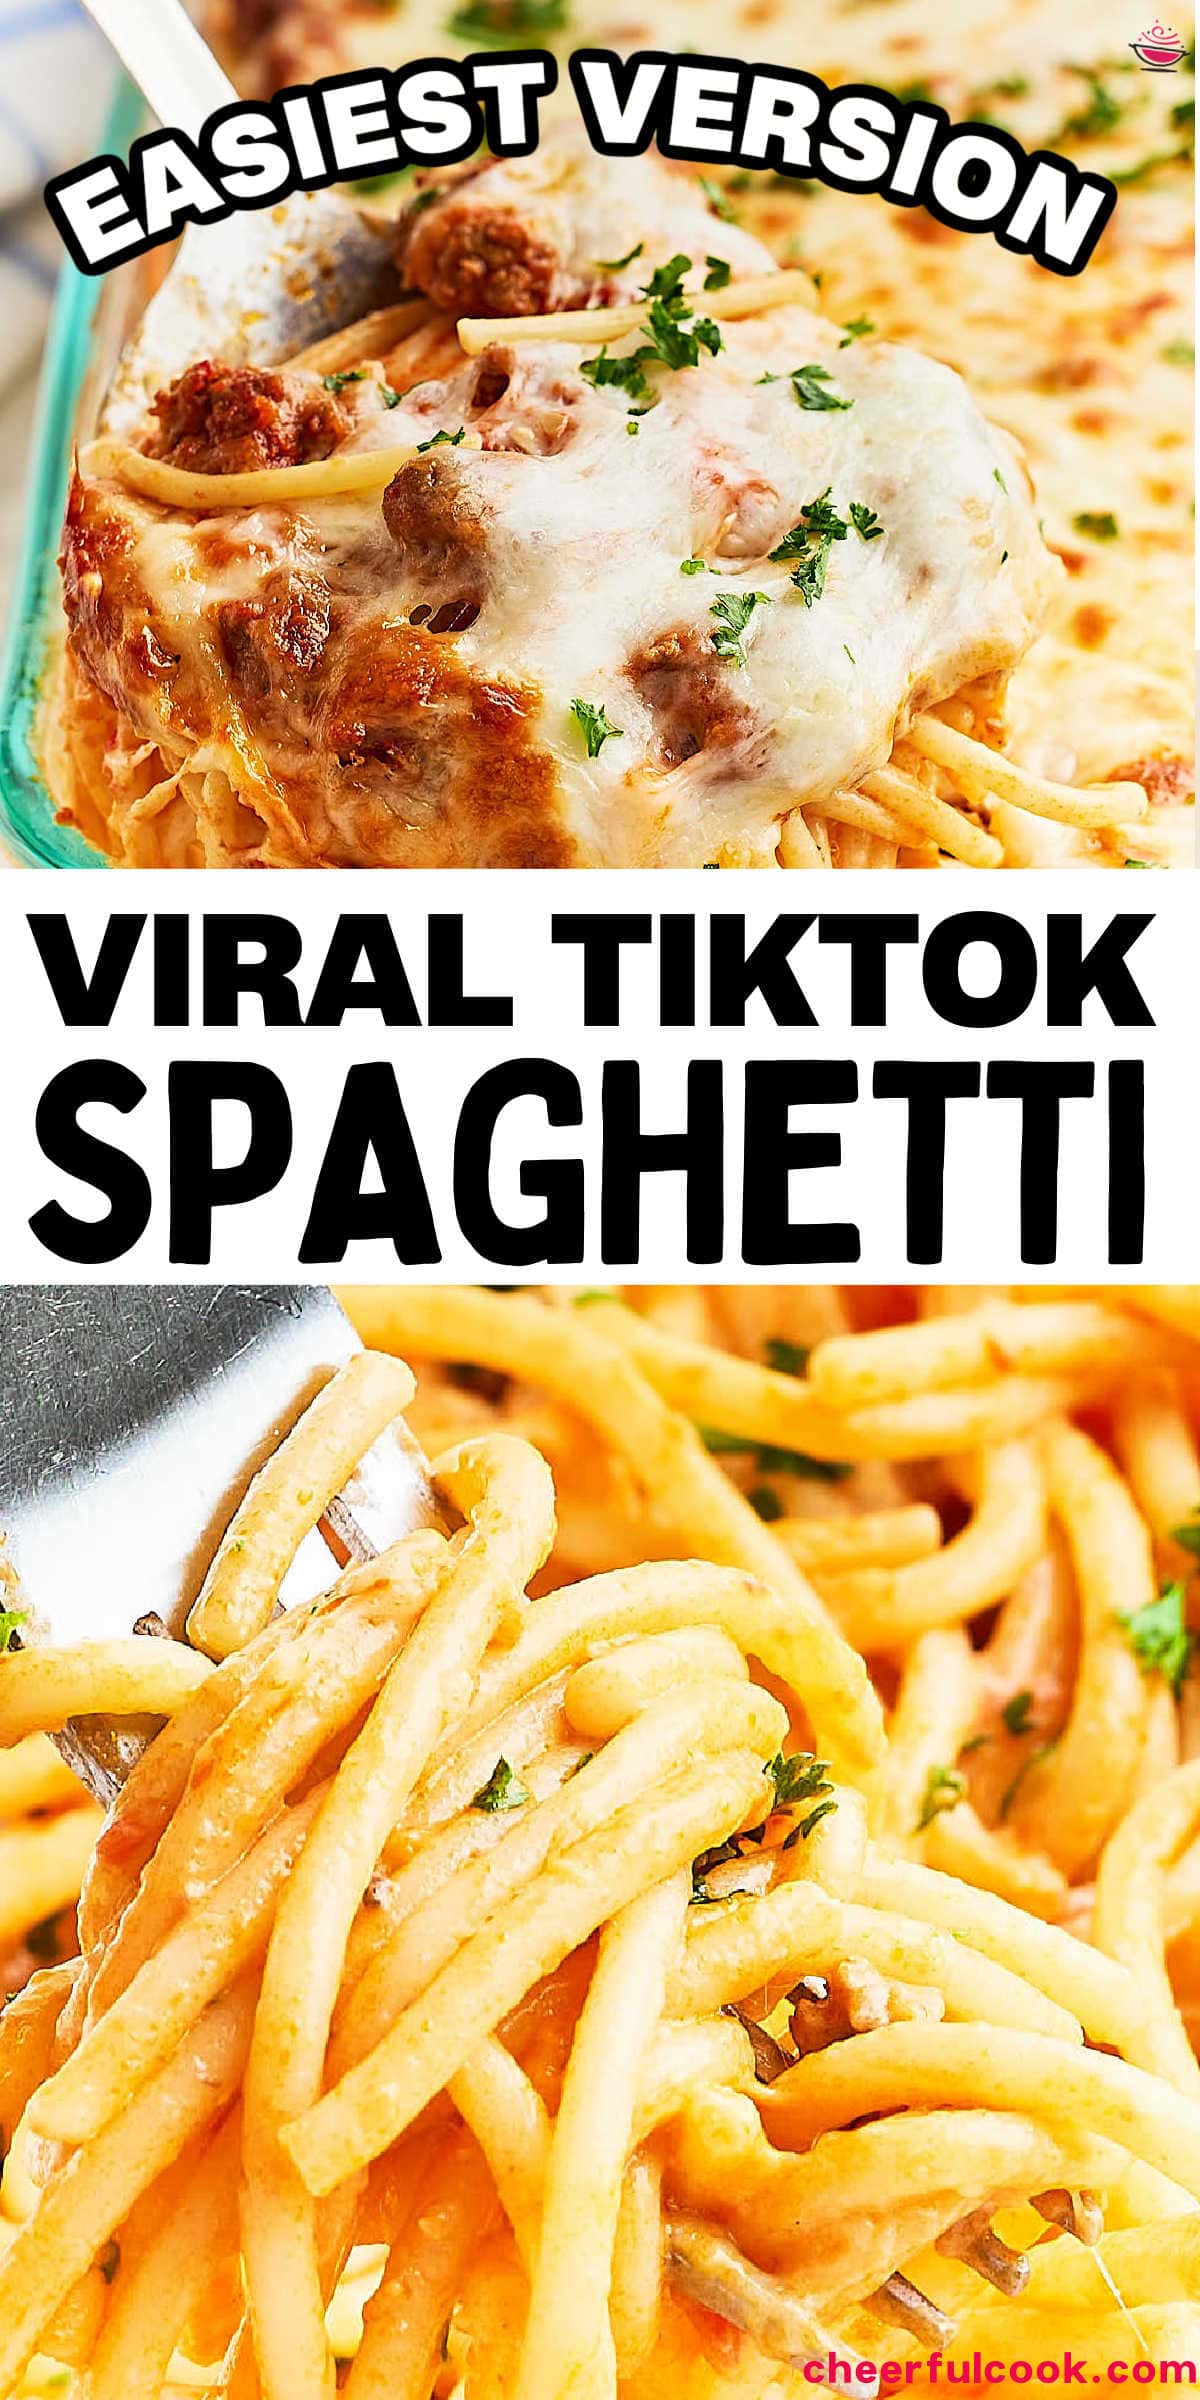 Experience the perfect blend of convenience and flavor with this super easy and delicious viral TikTok Spaghetti. This simple recipe, made with six ingredients, transforms your weeknight dinner into a dish that is both heartwarming and trendy. #cheerfulcook #spaghetticasserole #tiktokspaghetti #tiktokpasta #bakedspaghetti #easyrecipe #easycomfortfood via @cheerfulcook